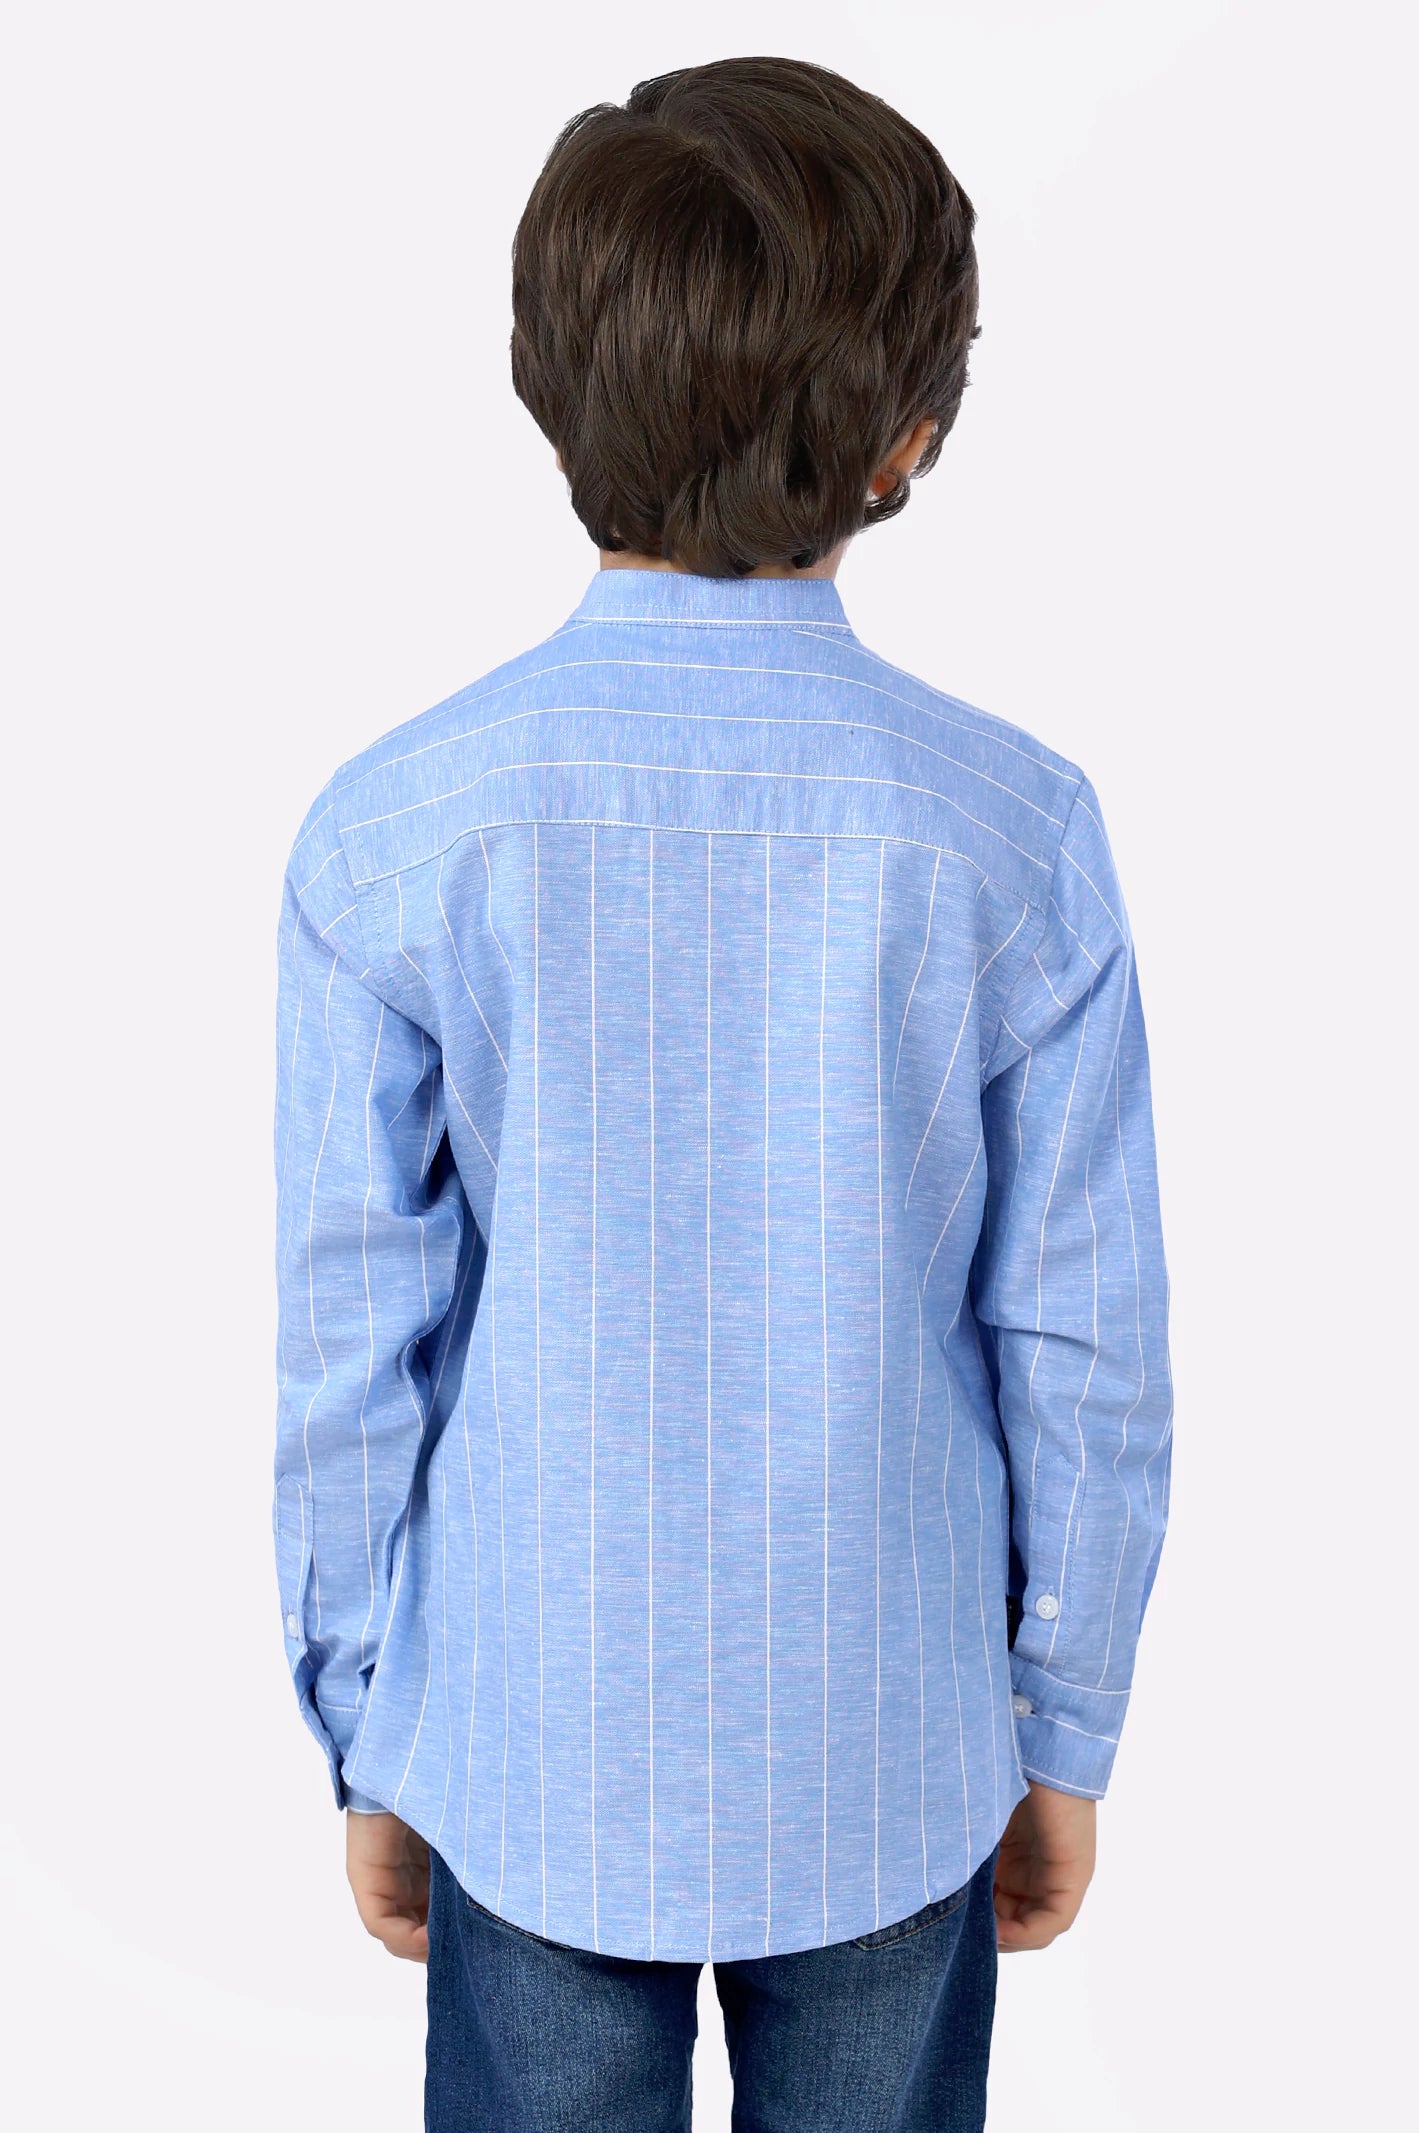 Blue Pinstripe Boys Shirt From Diners